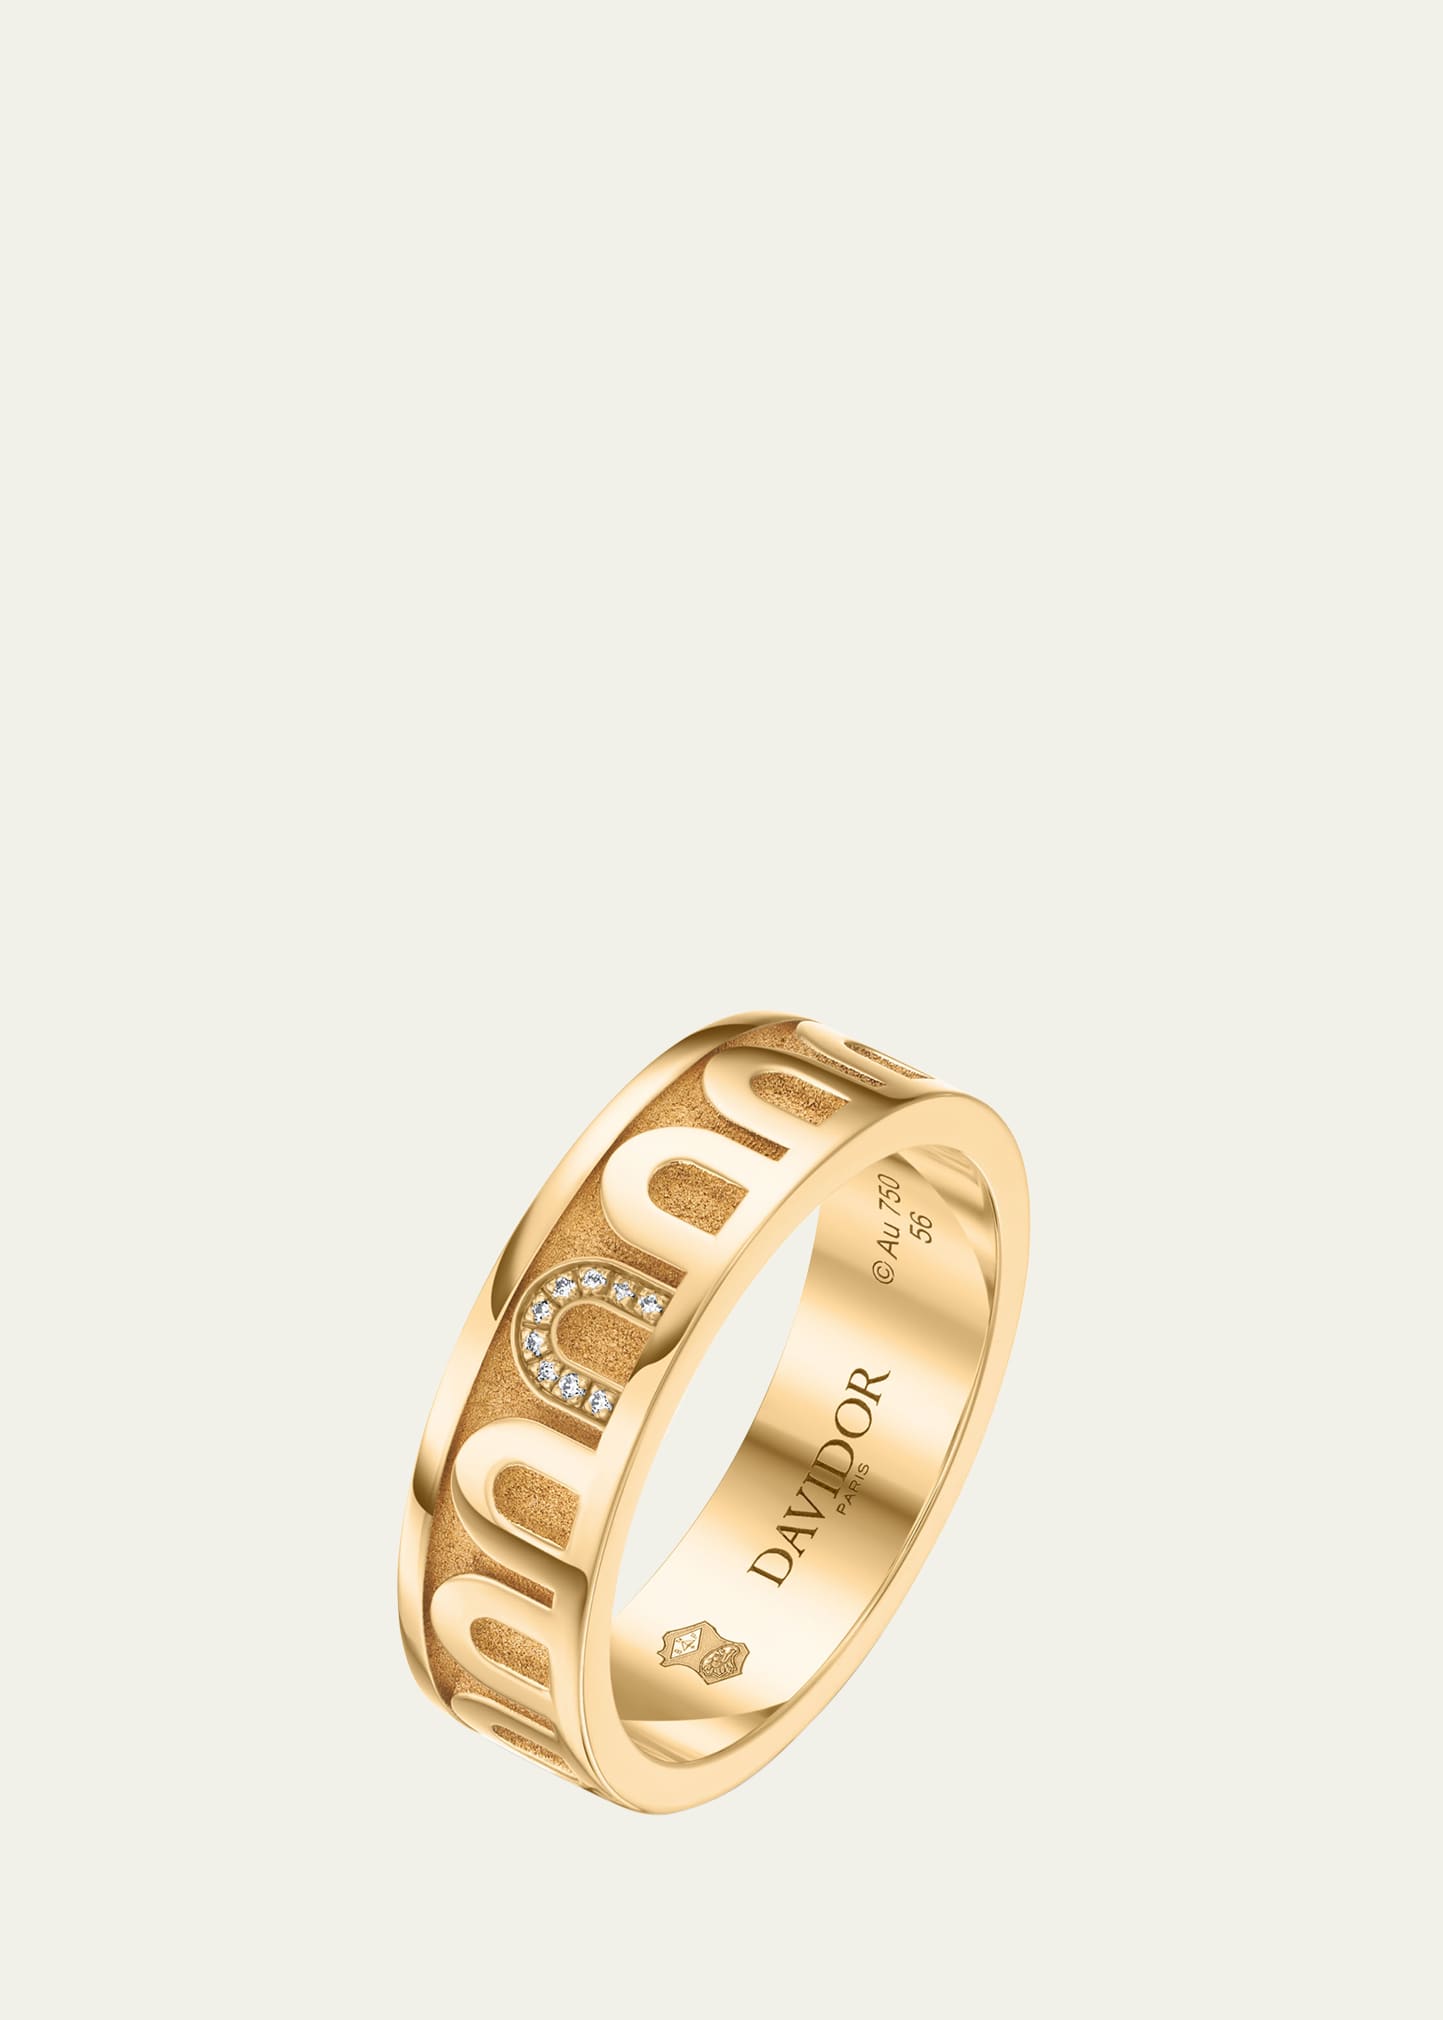 Davidor L'arc De  Ring Mm In 18k Yellow Gold With Satin Finish And Porta Simple Diamonds